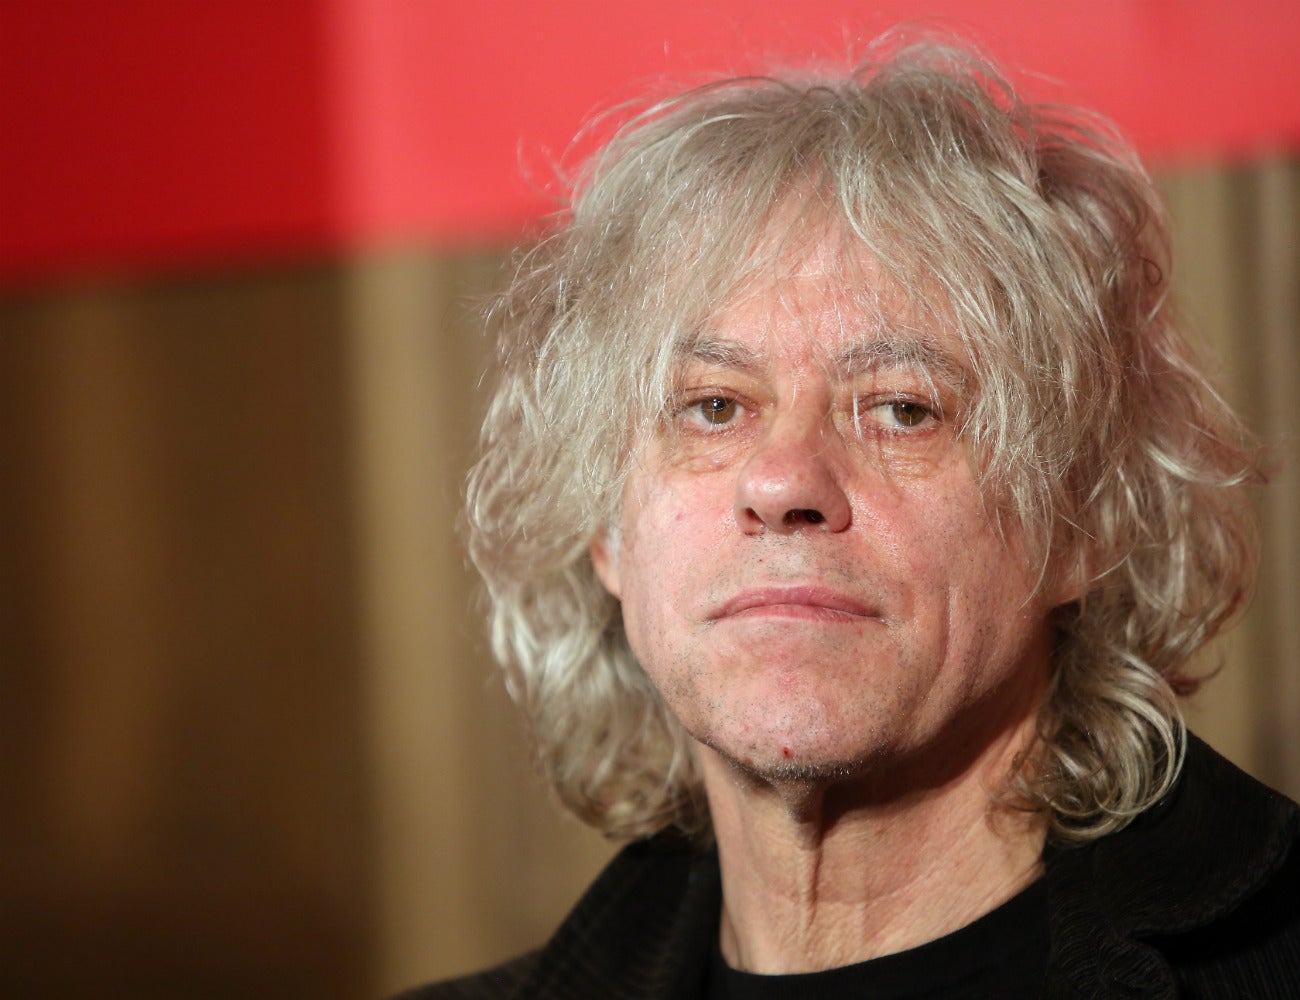 Bob Geldof admits 'Suffocating with grief' following daughter's funeral